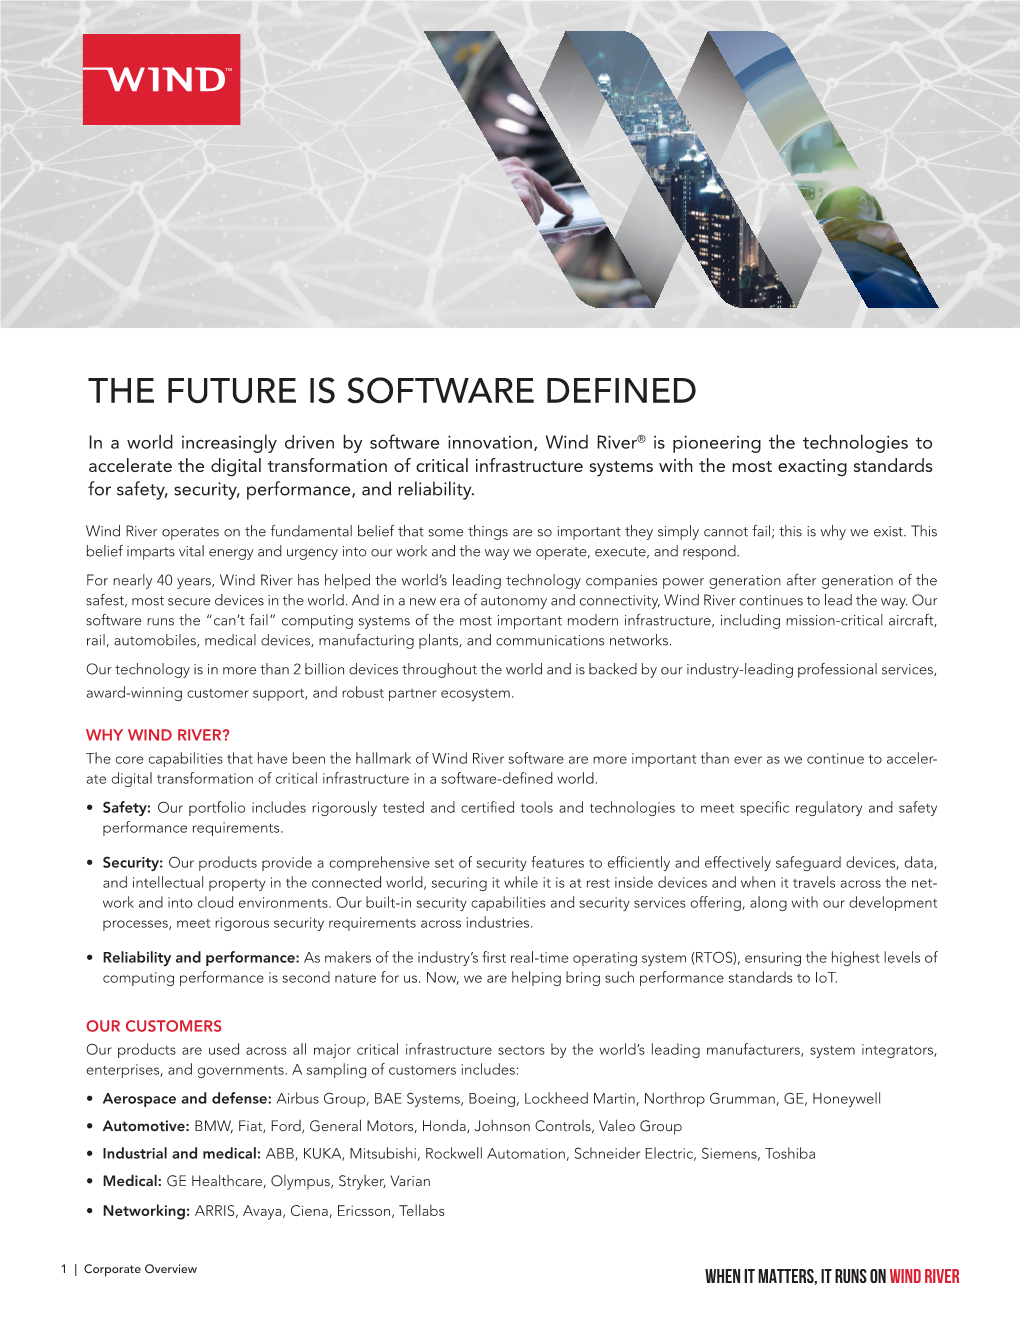 The Future Is Software Defined